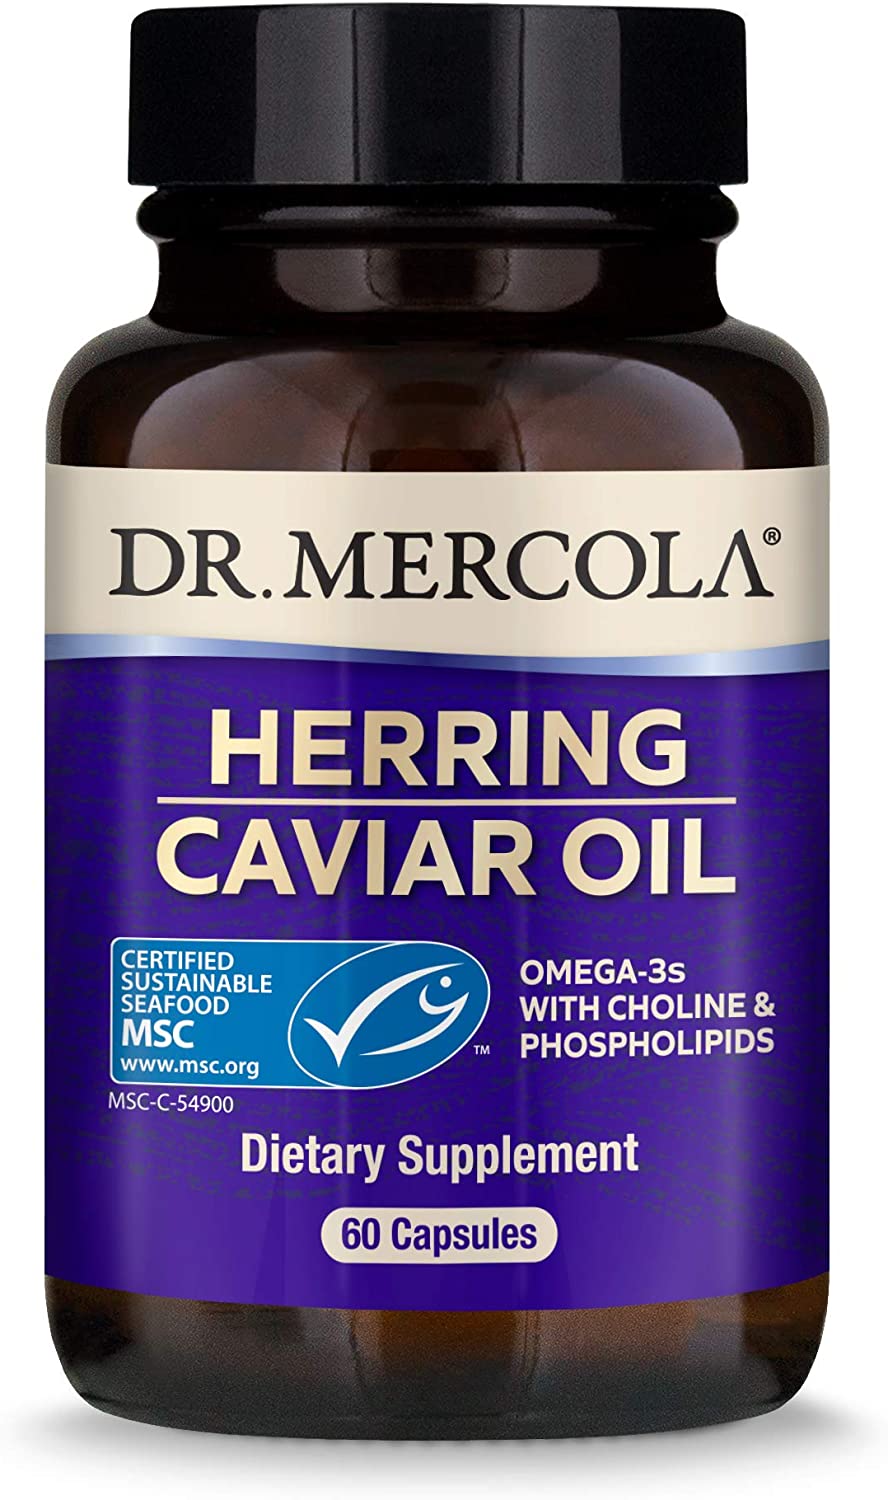 Dr. Mercola Herring Caviar Oil, 90 Servings (180 Capsules), non GMO, Gluten Free, Soy Free, Certified Sustainable Seafood...